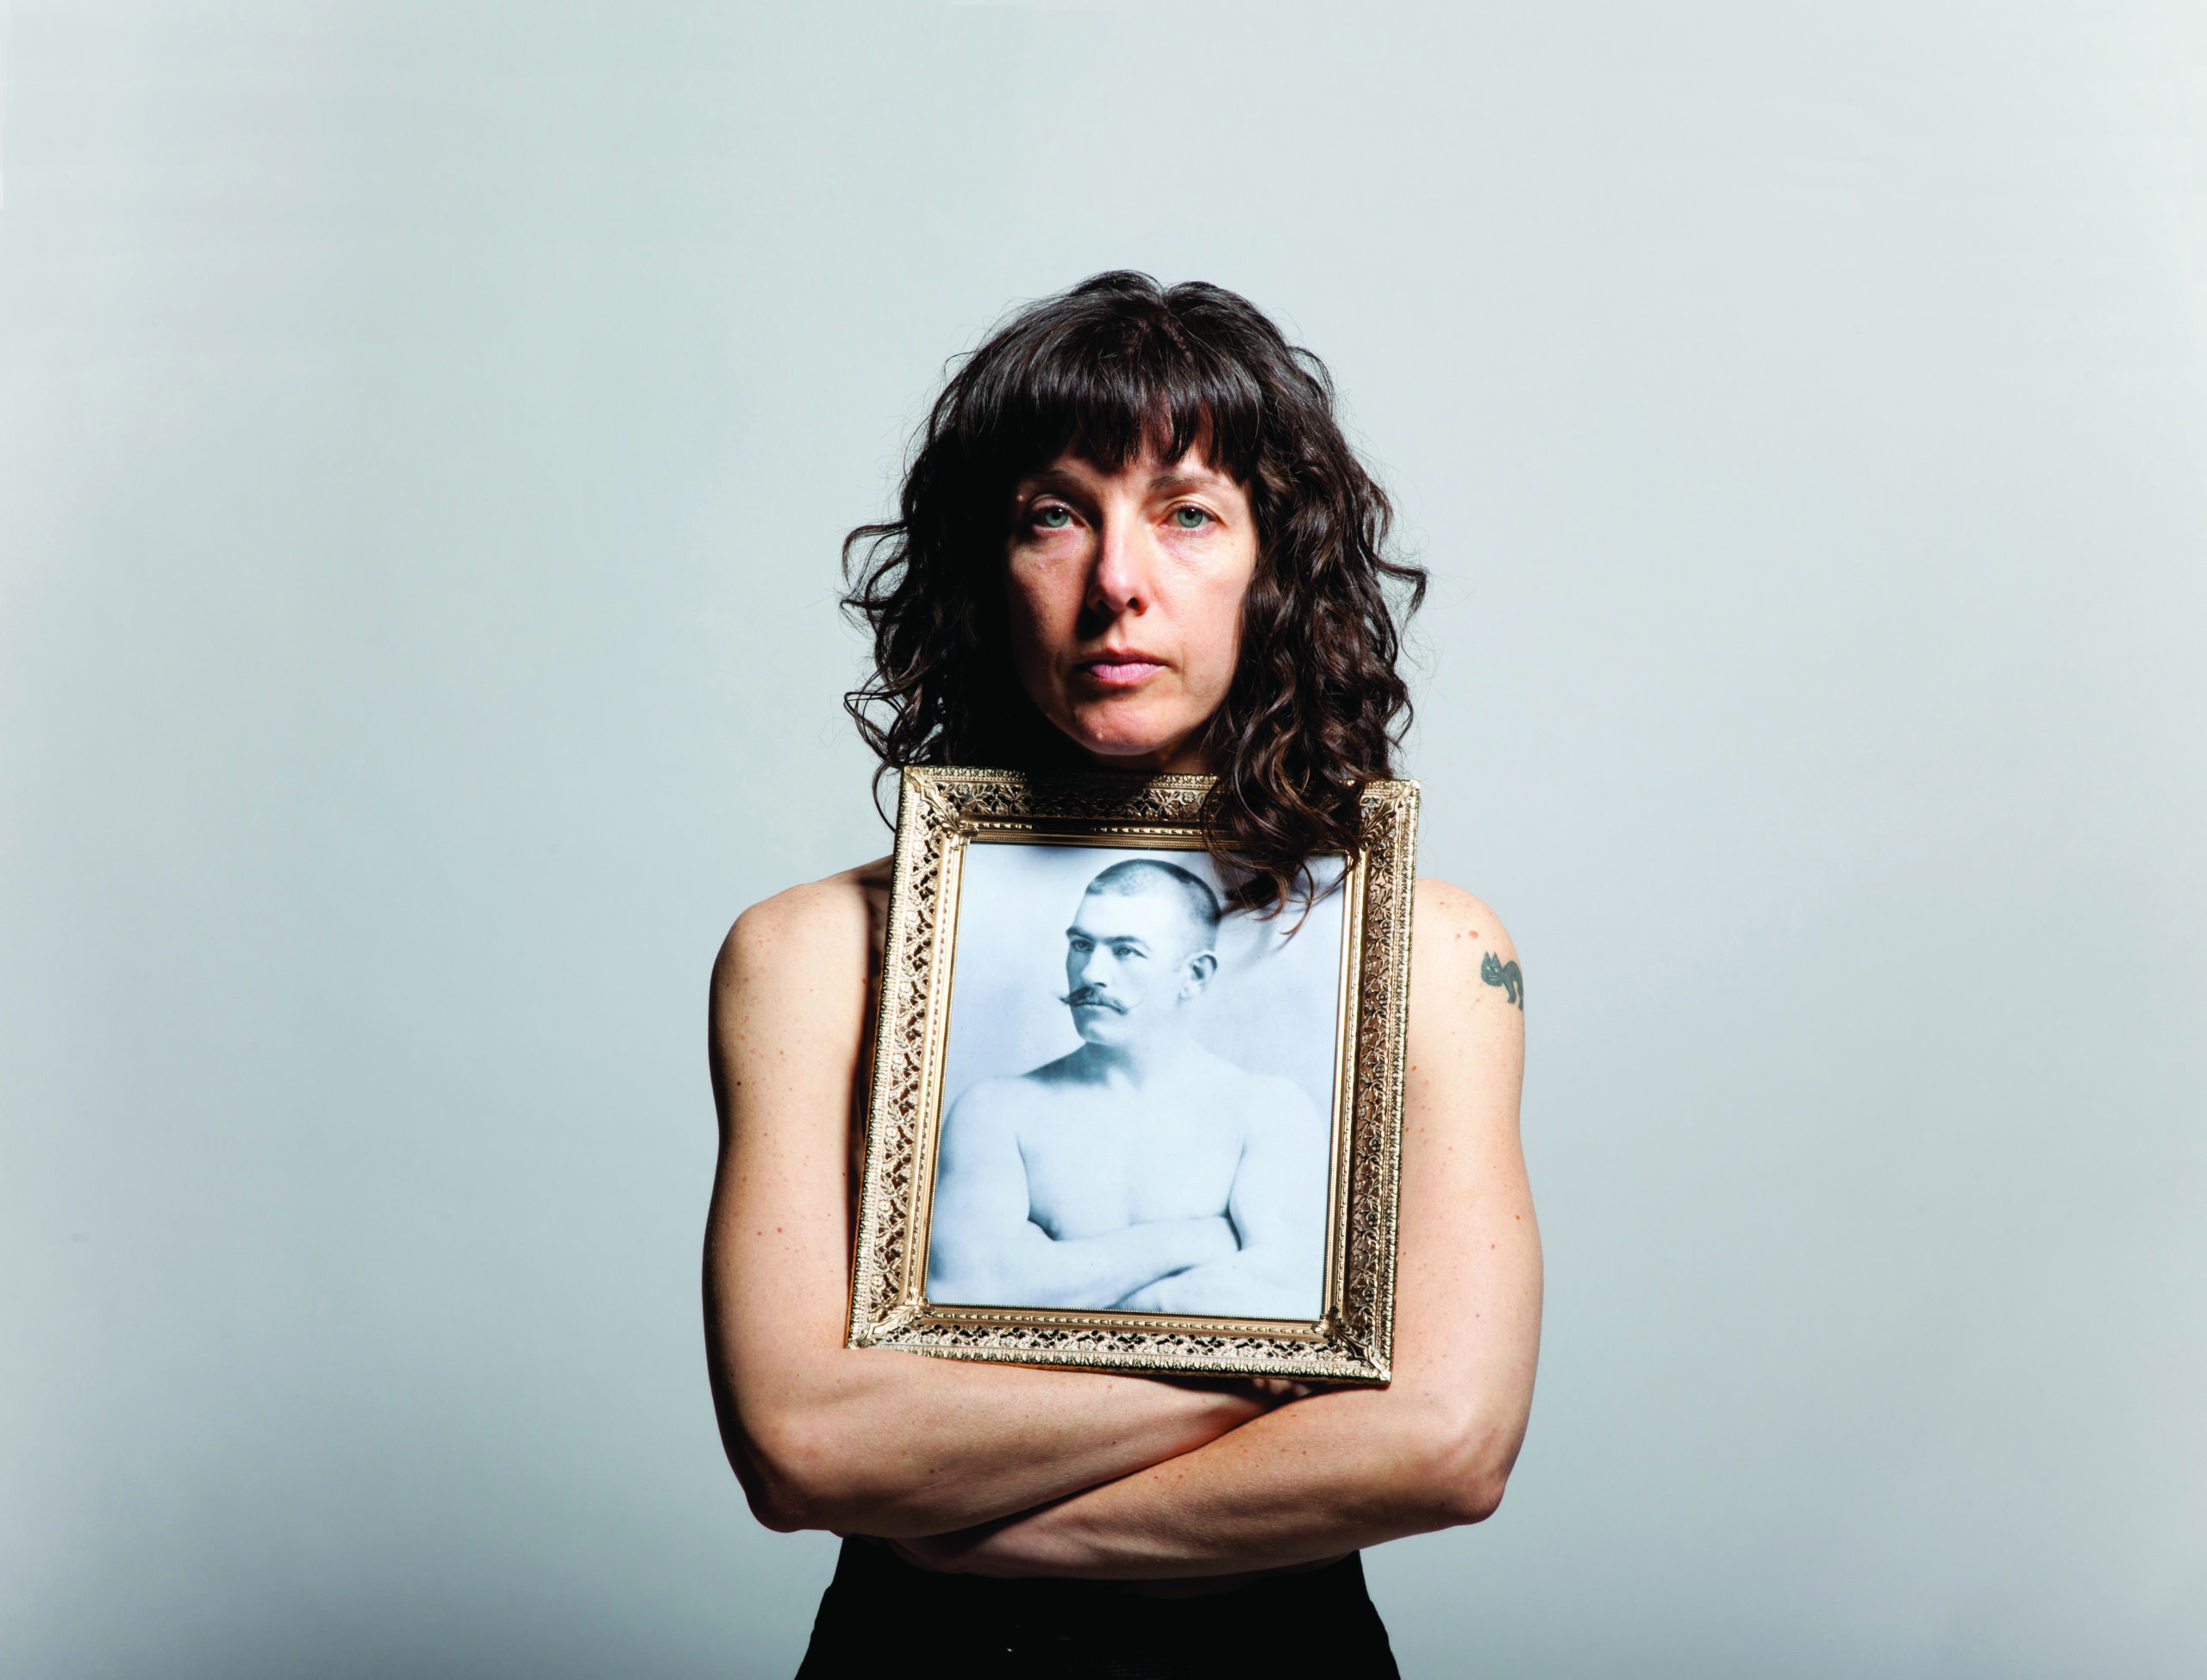 Chris Black, a white woman with long dark hair, faces the camera holding a picture of a man with a shaved head in the same pose